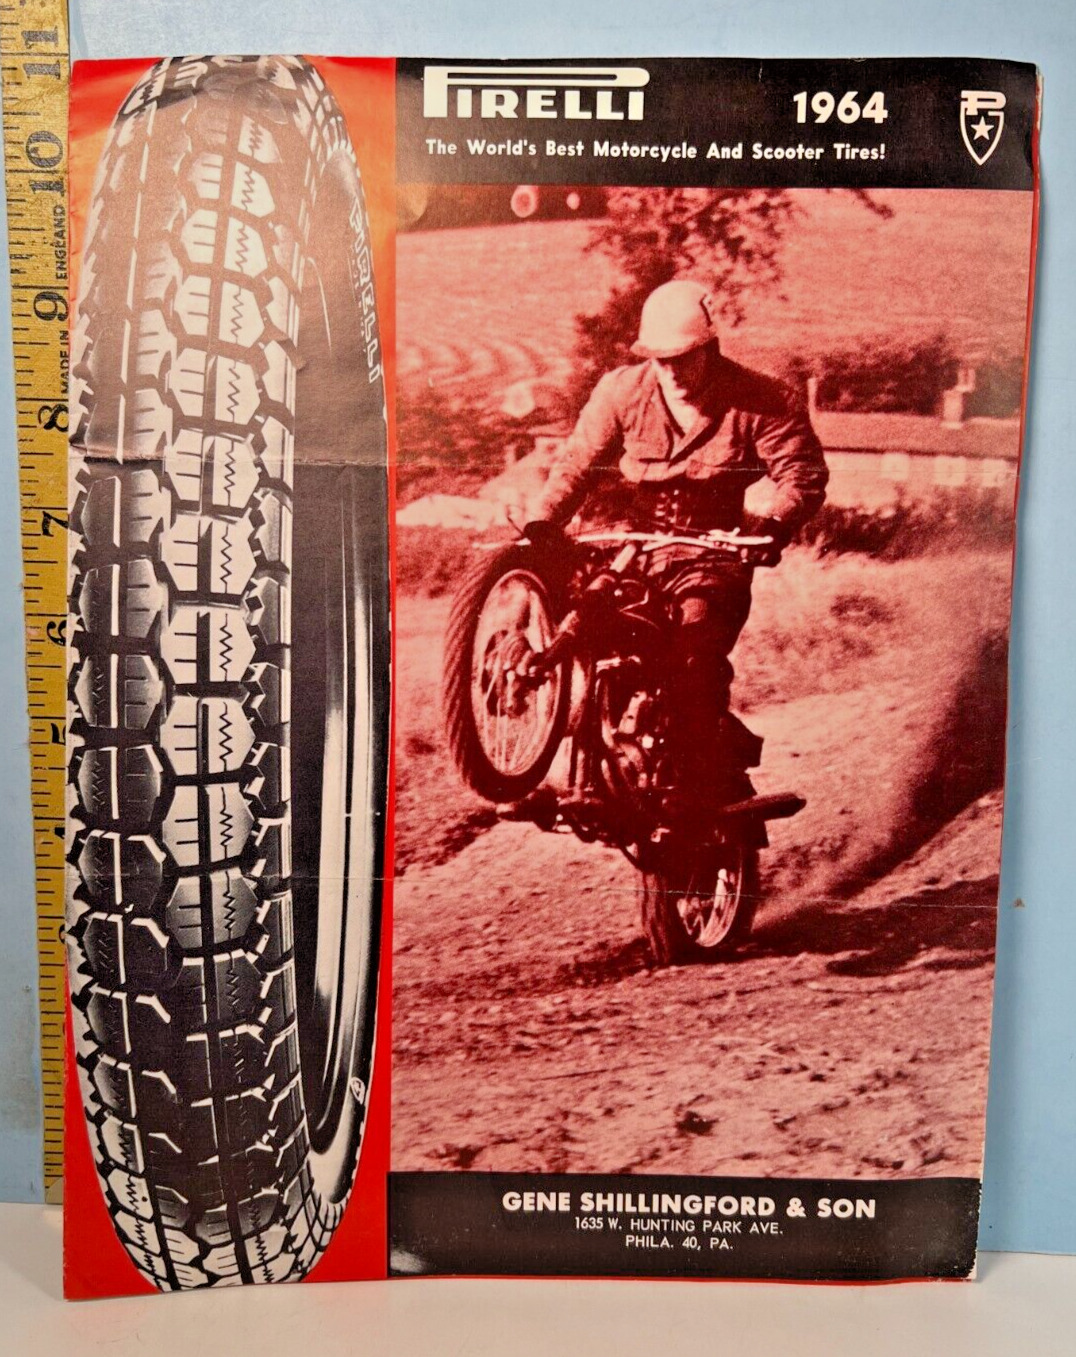 1964 Pirelli The Worlds Best Motorcycle & Scooter Tires & Inner-Tubes Brochure